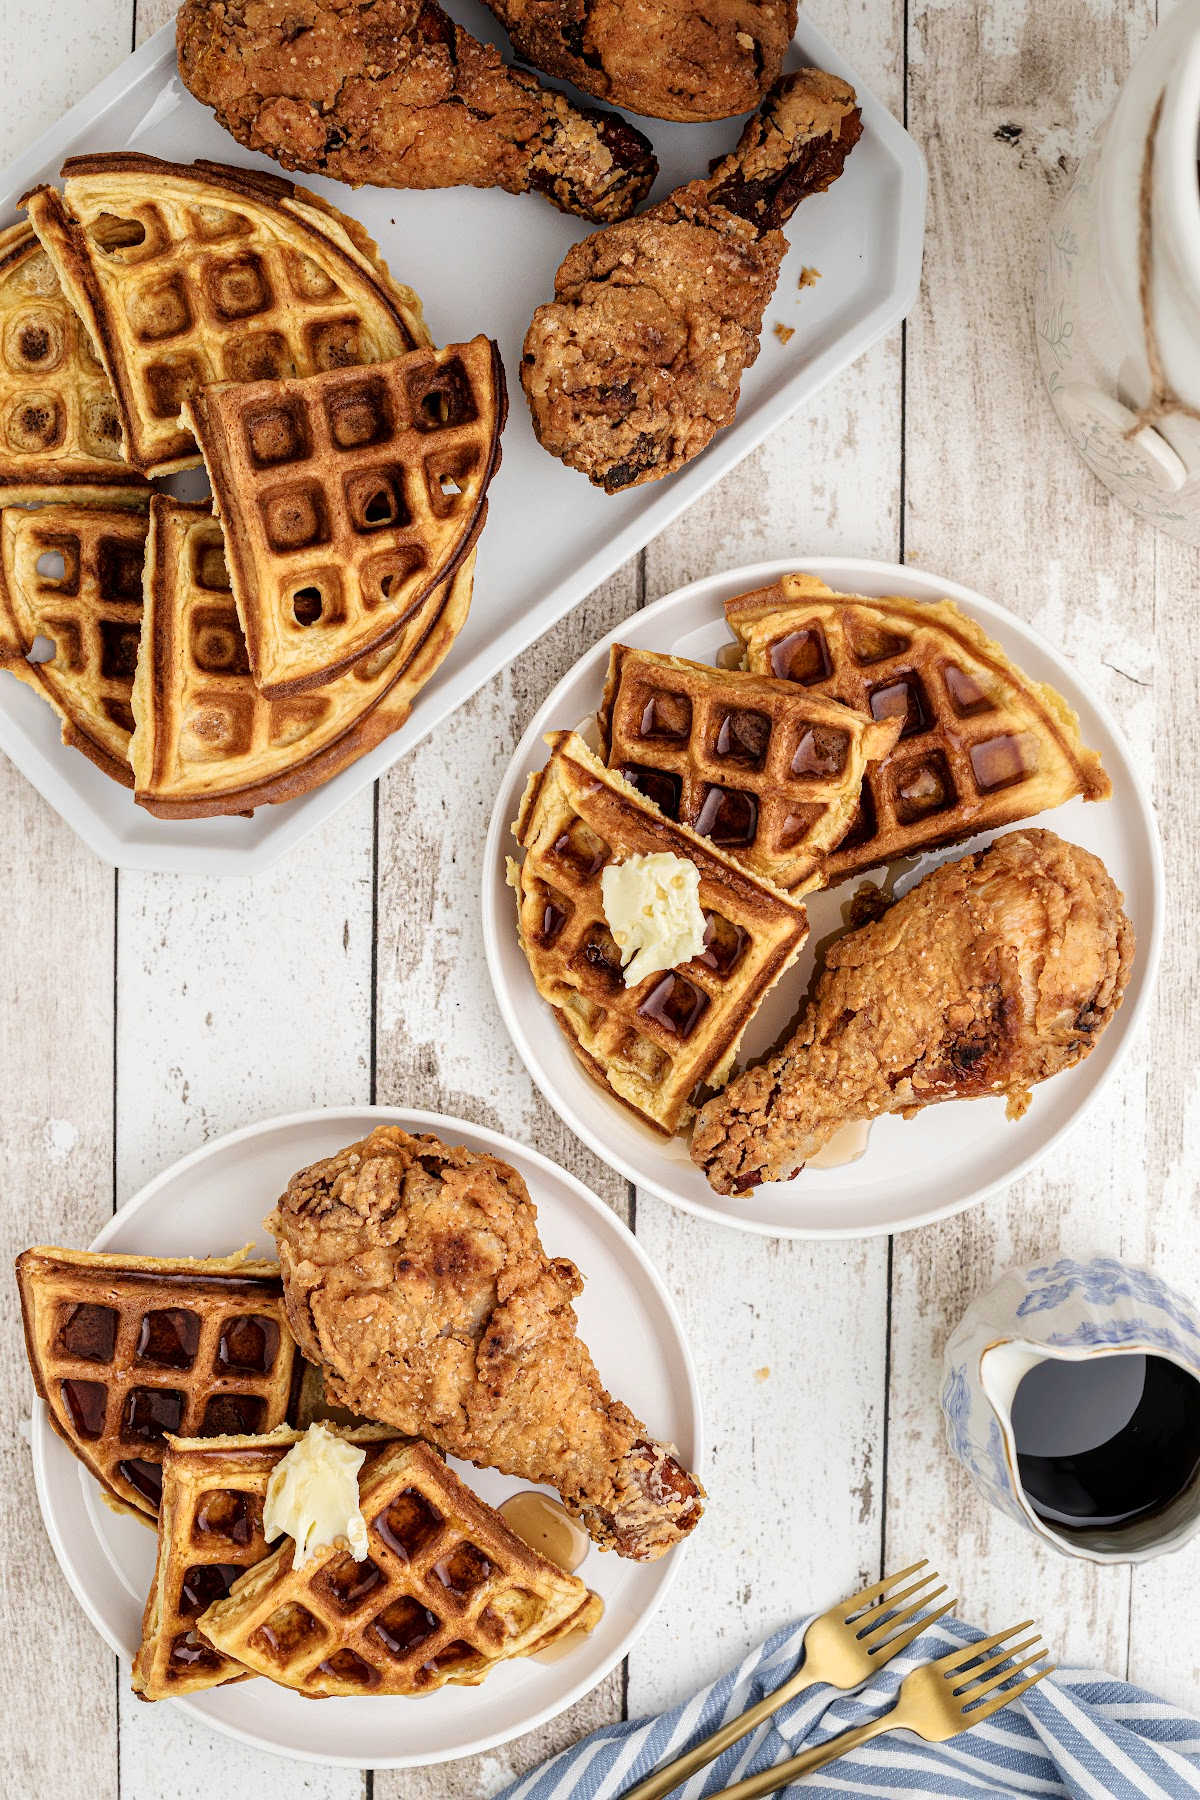 A dish of fried chicken and waffles with syrup on them on dished out plates